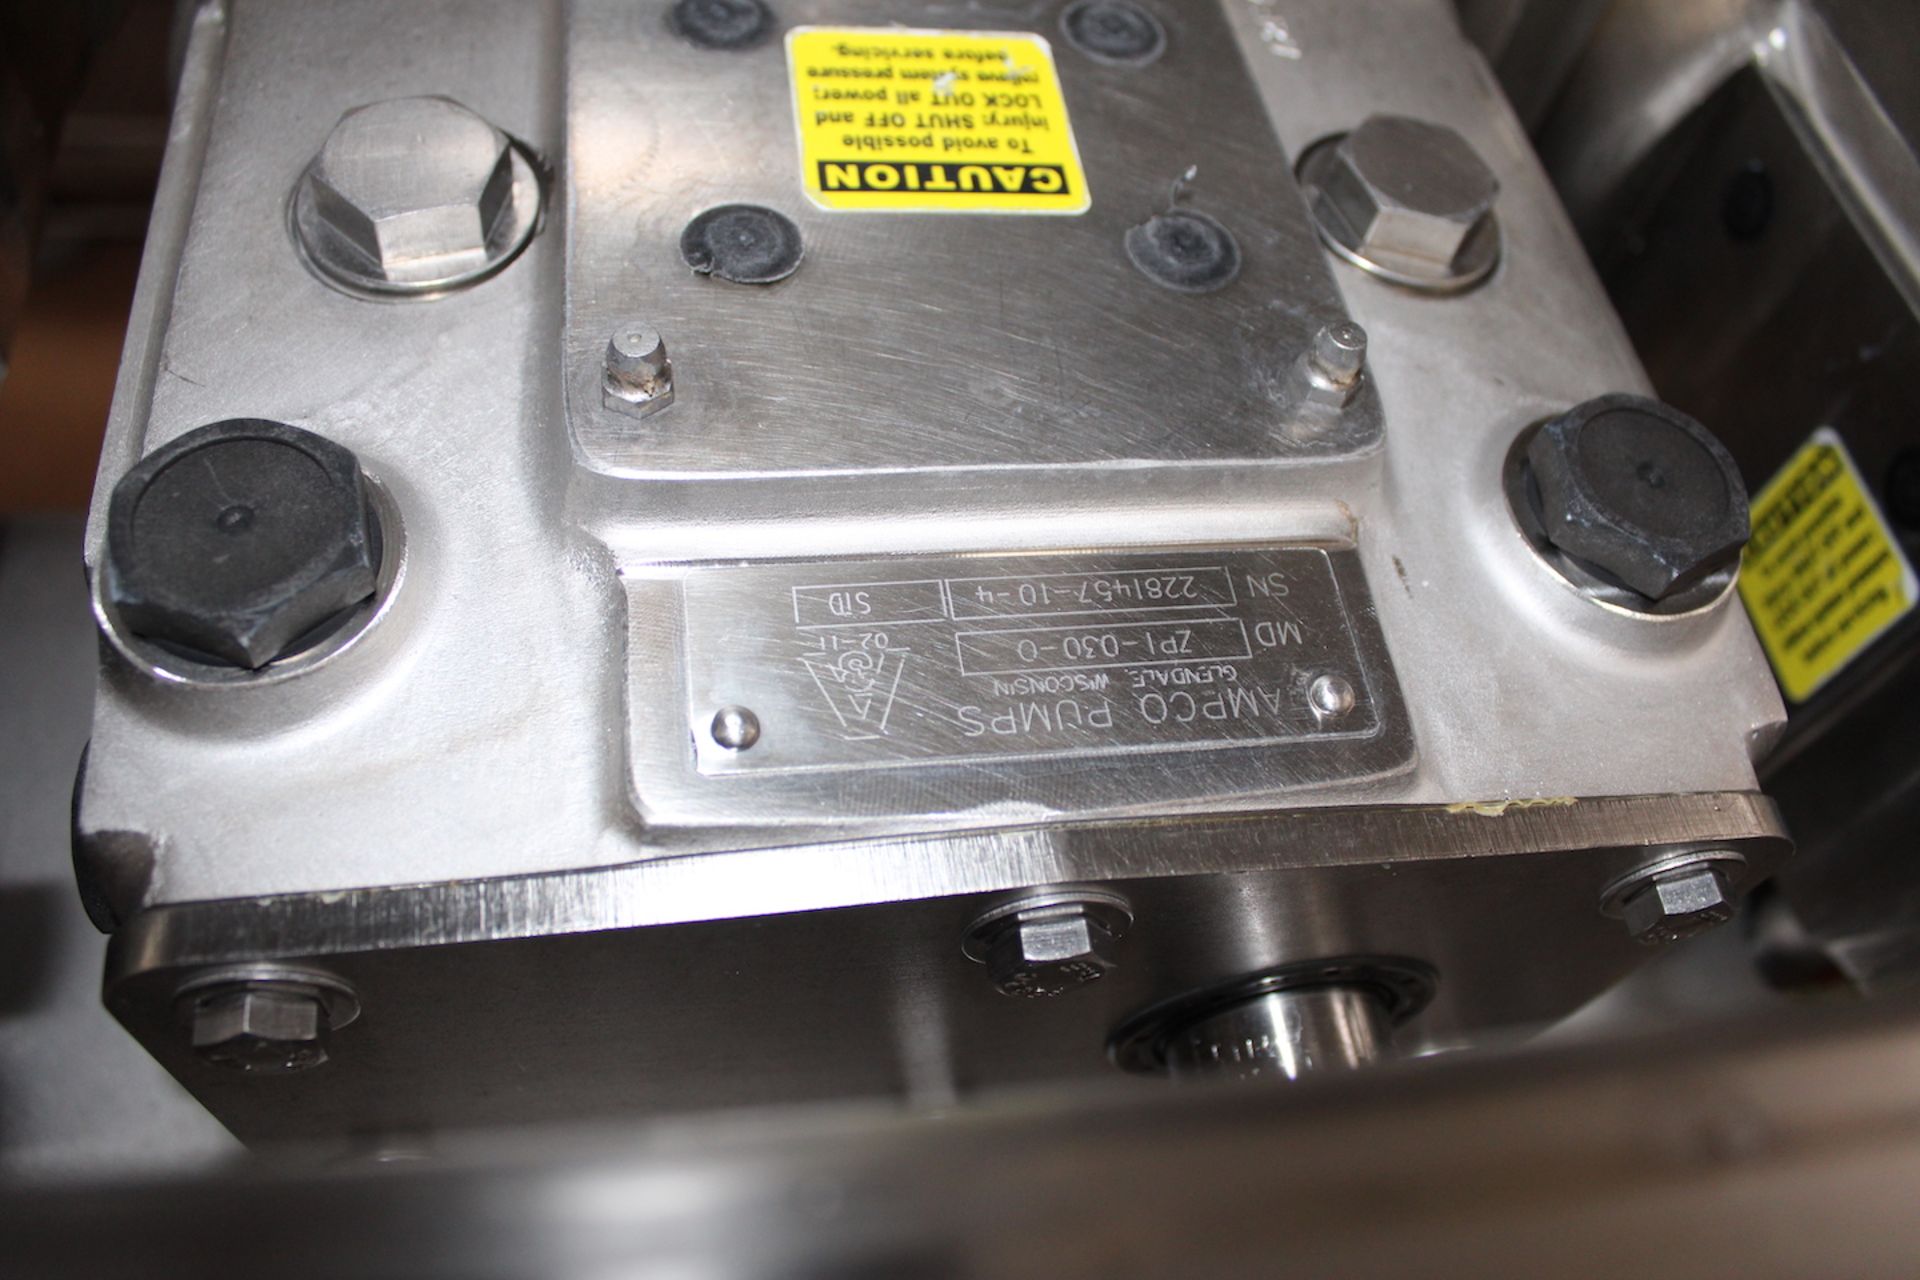 HINDS-BOCK 4-HEAD DEPOSITOR / FILLER, MODEL 4P-039, S/N 5698, WITH (4) AMPCO AND WCB POSITIVE - Image 9 of 13